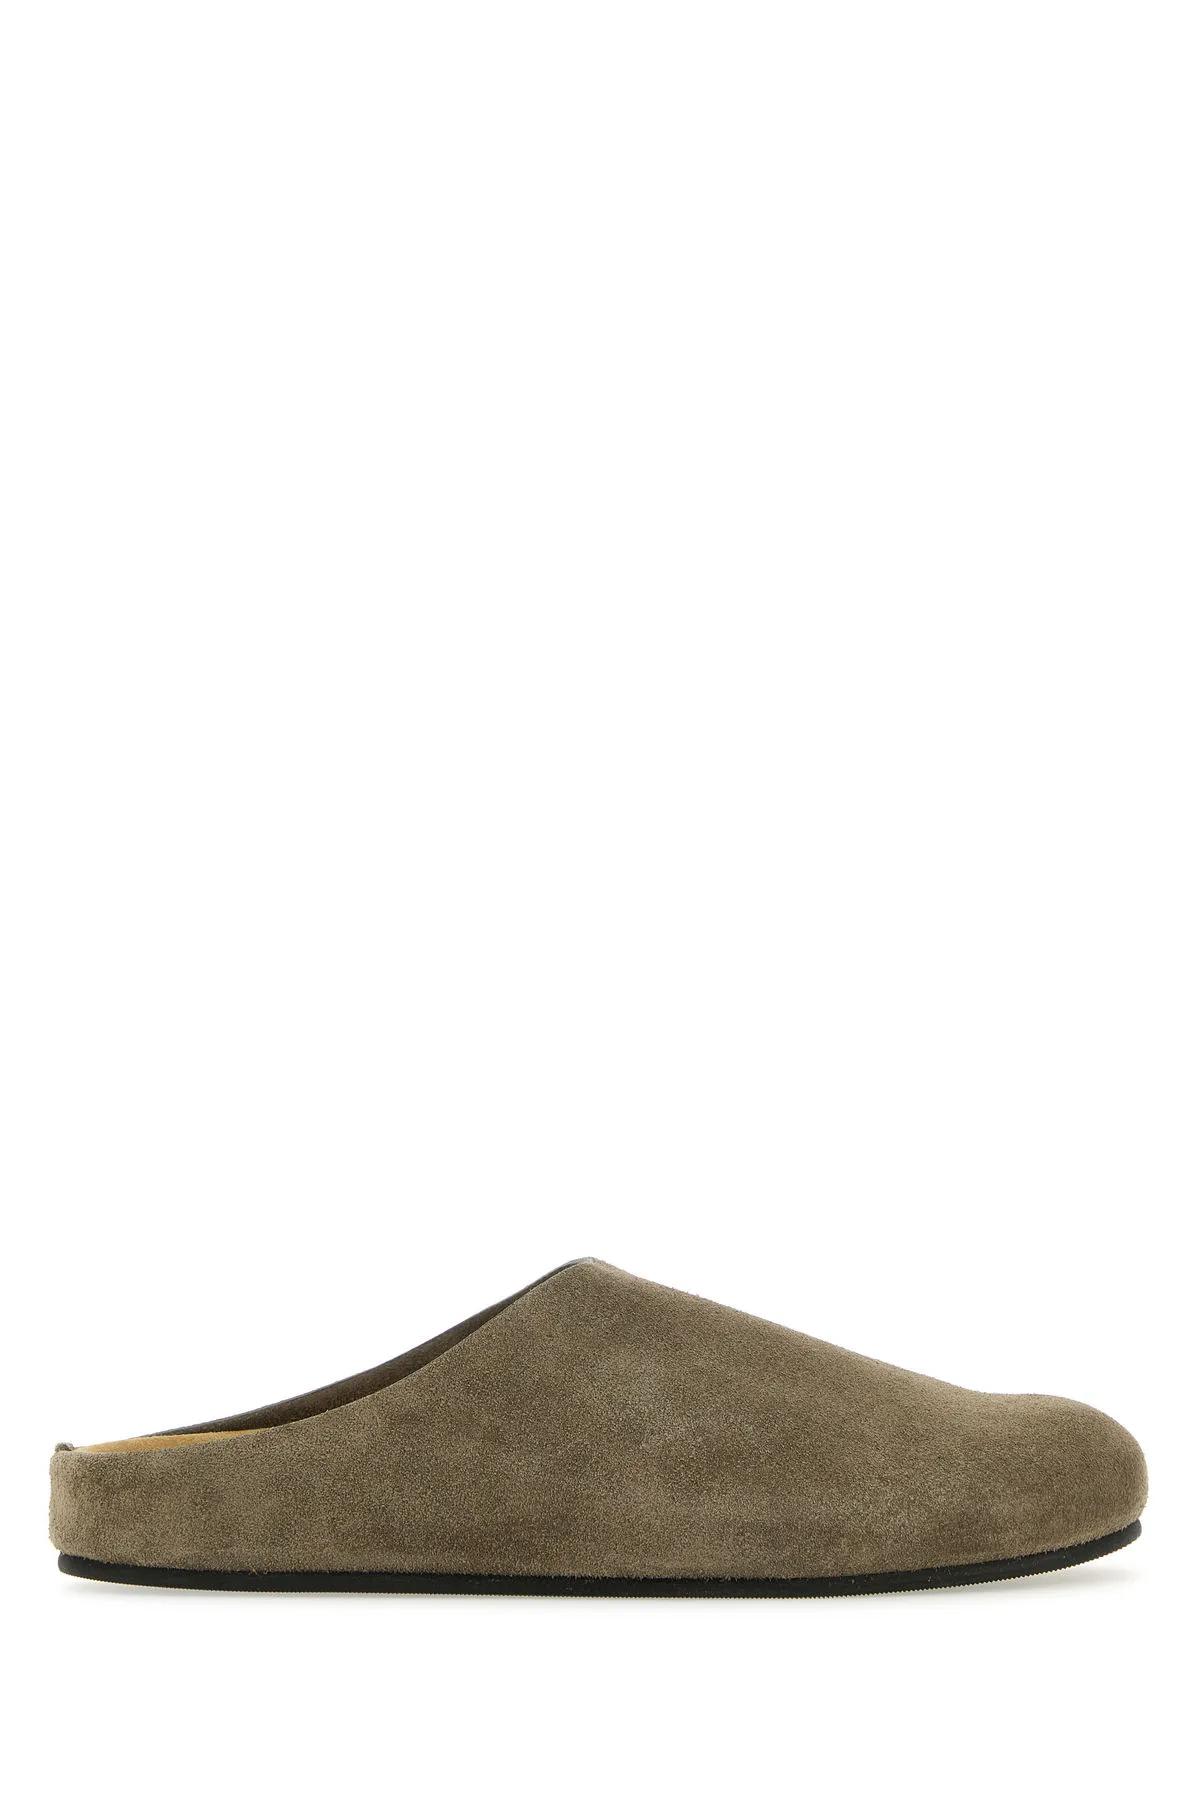 THE ROW DOVE GREY SUEDE HUGO SLIPPERS